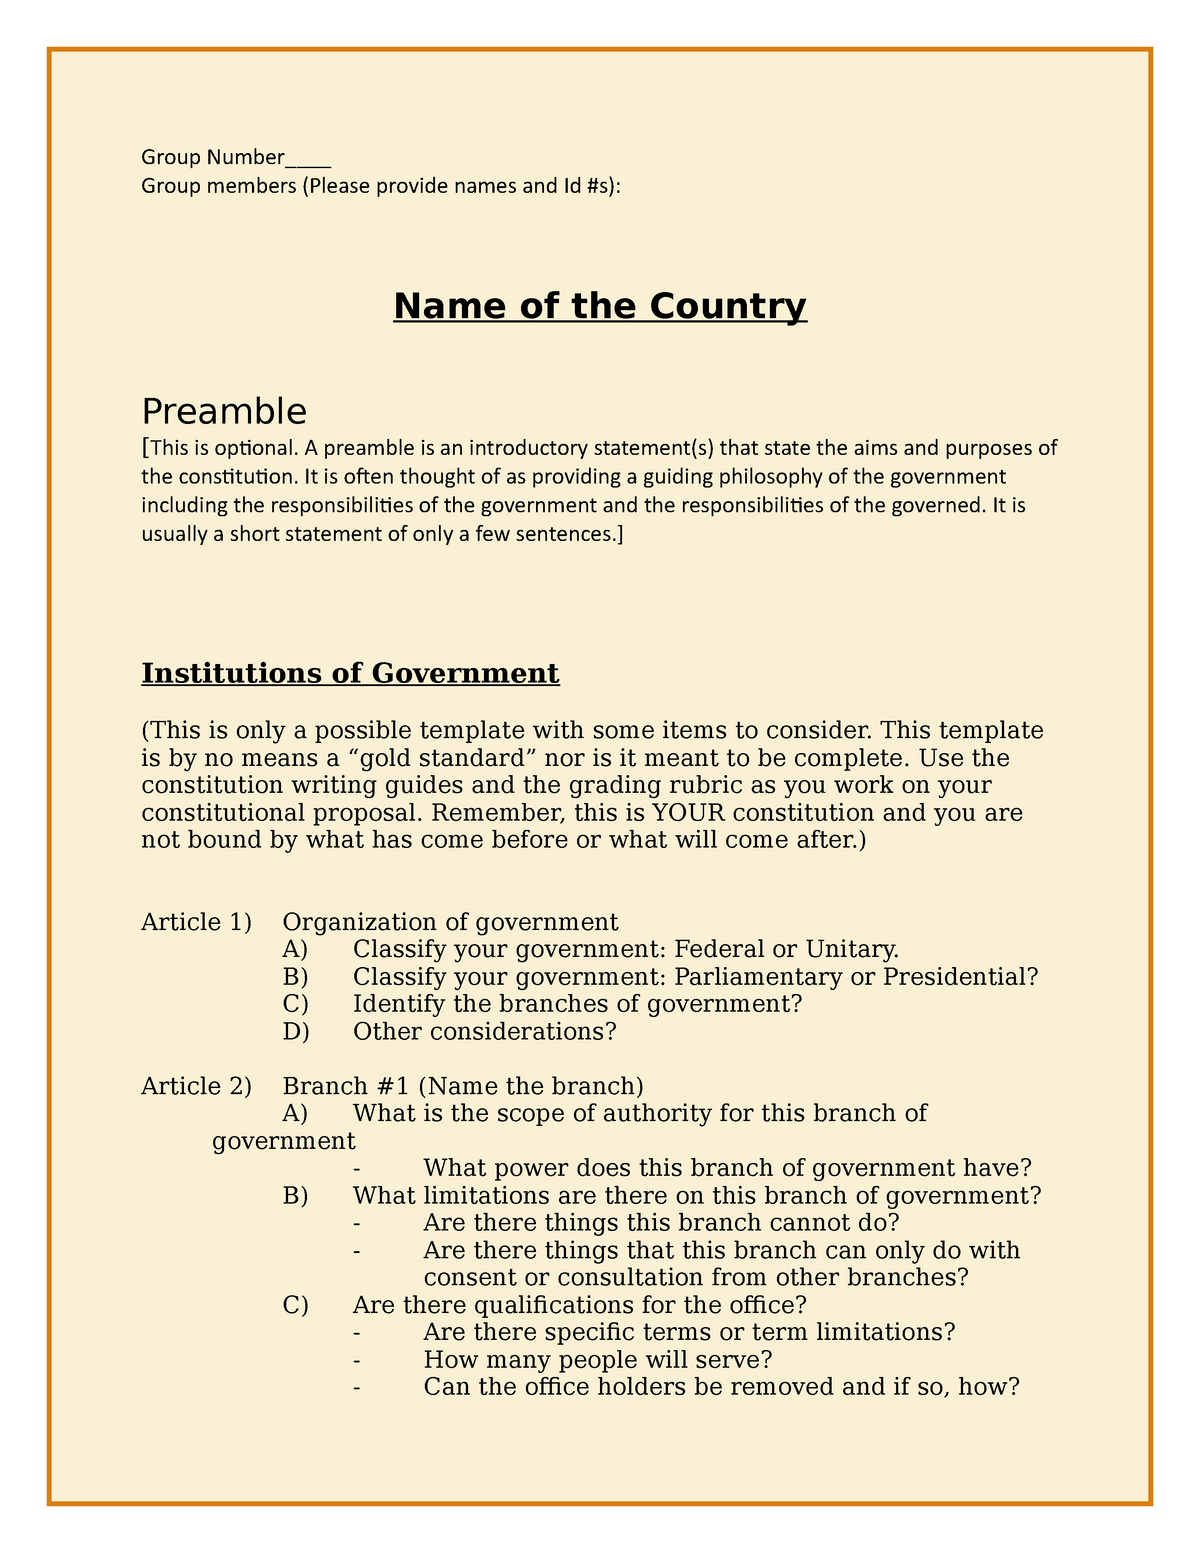 constitution-template-version-a-group-number-group-members